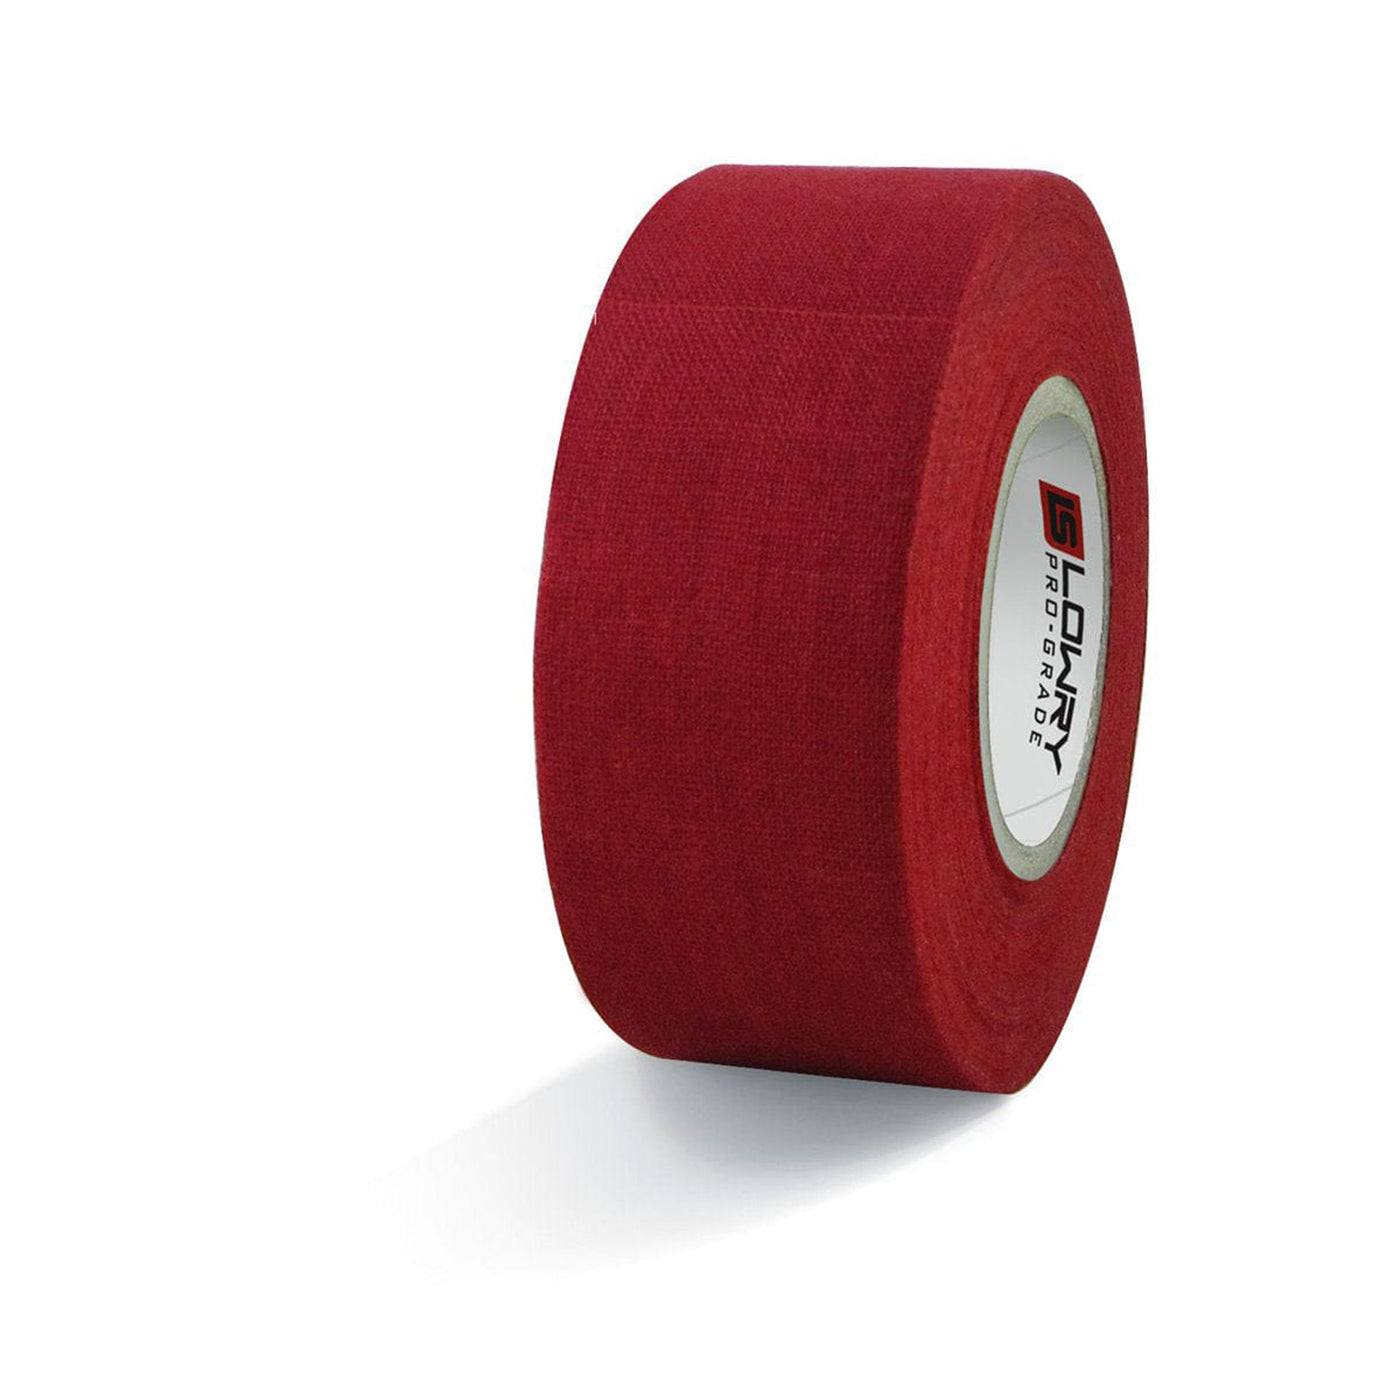 Lowry Sports Pro-Grade Colored Hockey Stick Tape - The Hockey Shop Source For Sports